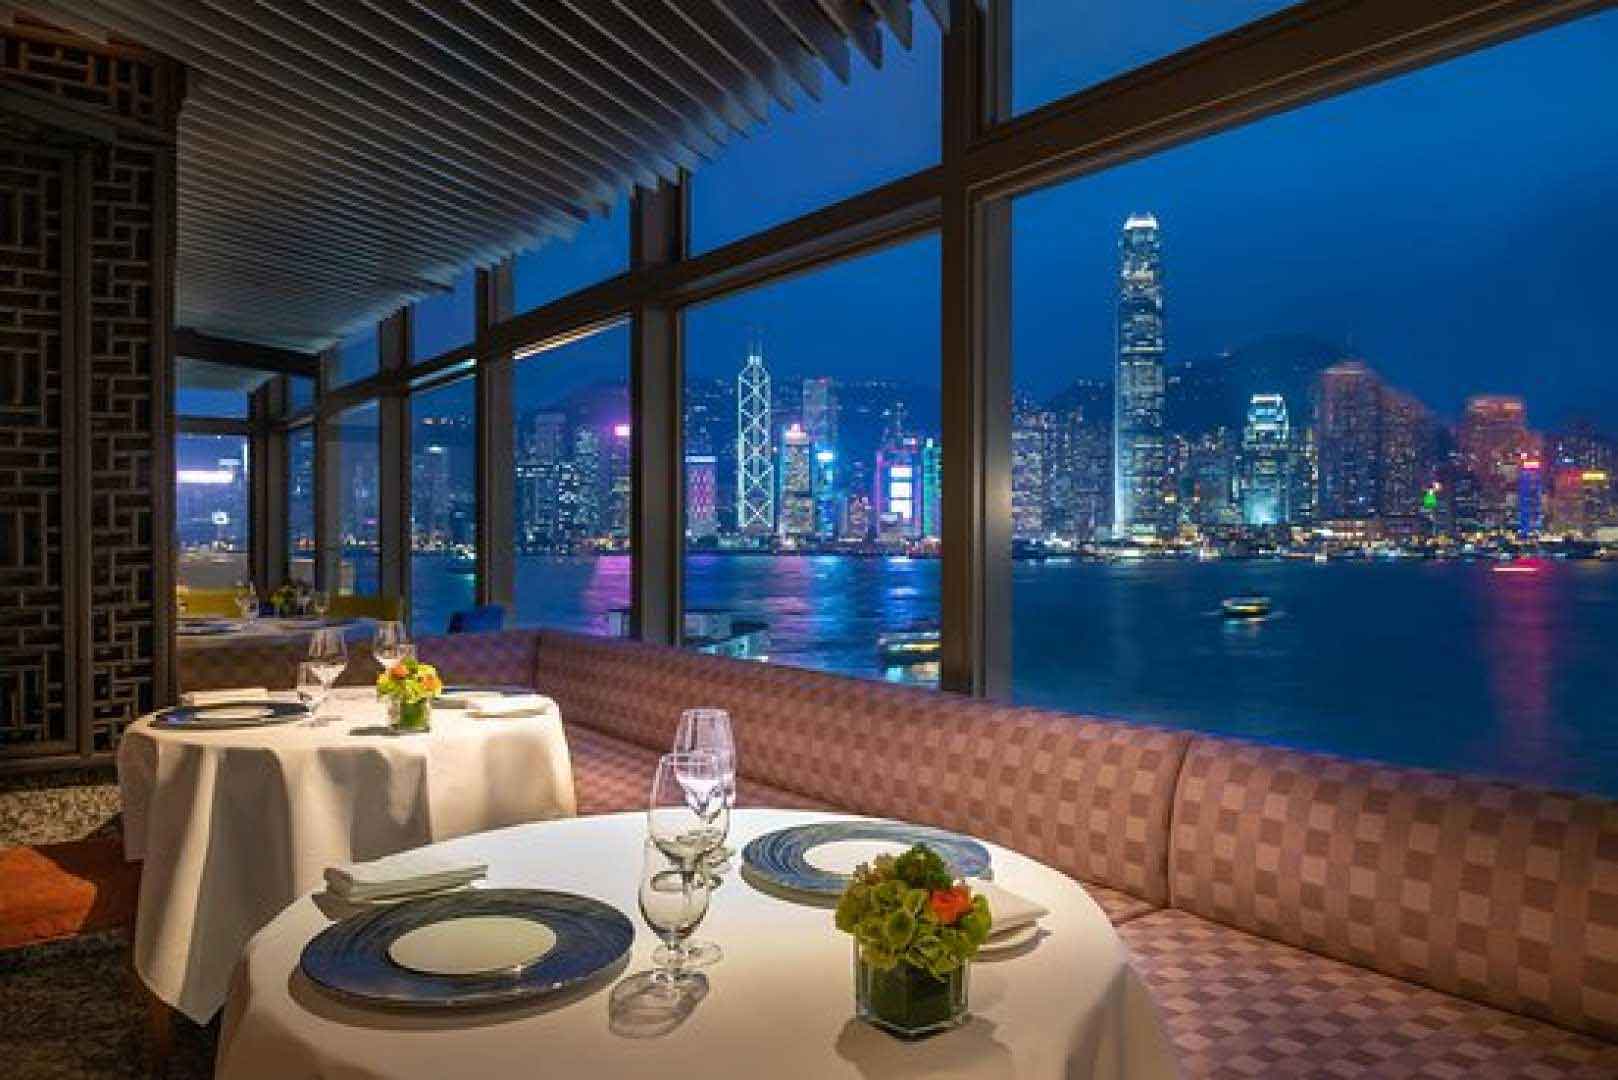 marco-polo-hong-kong-hotel-staycation-2020-4